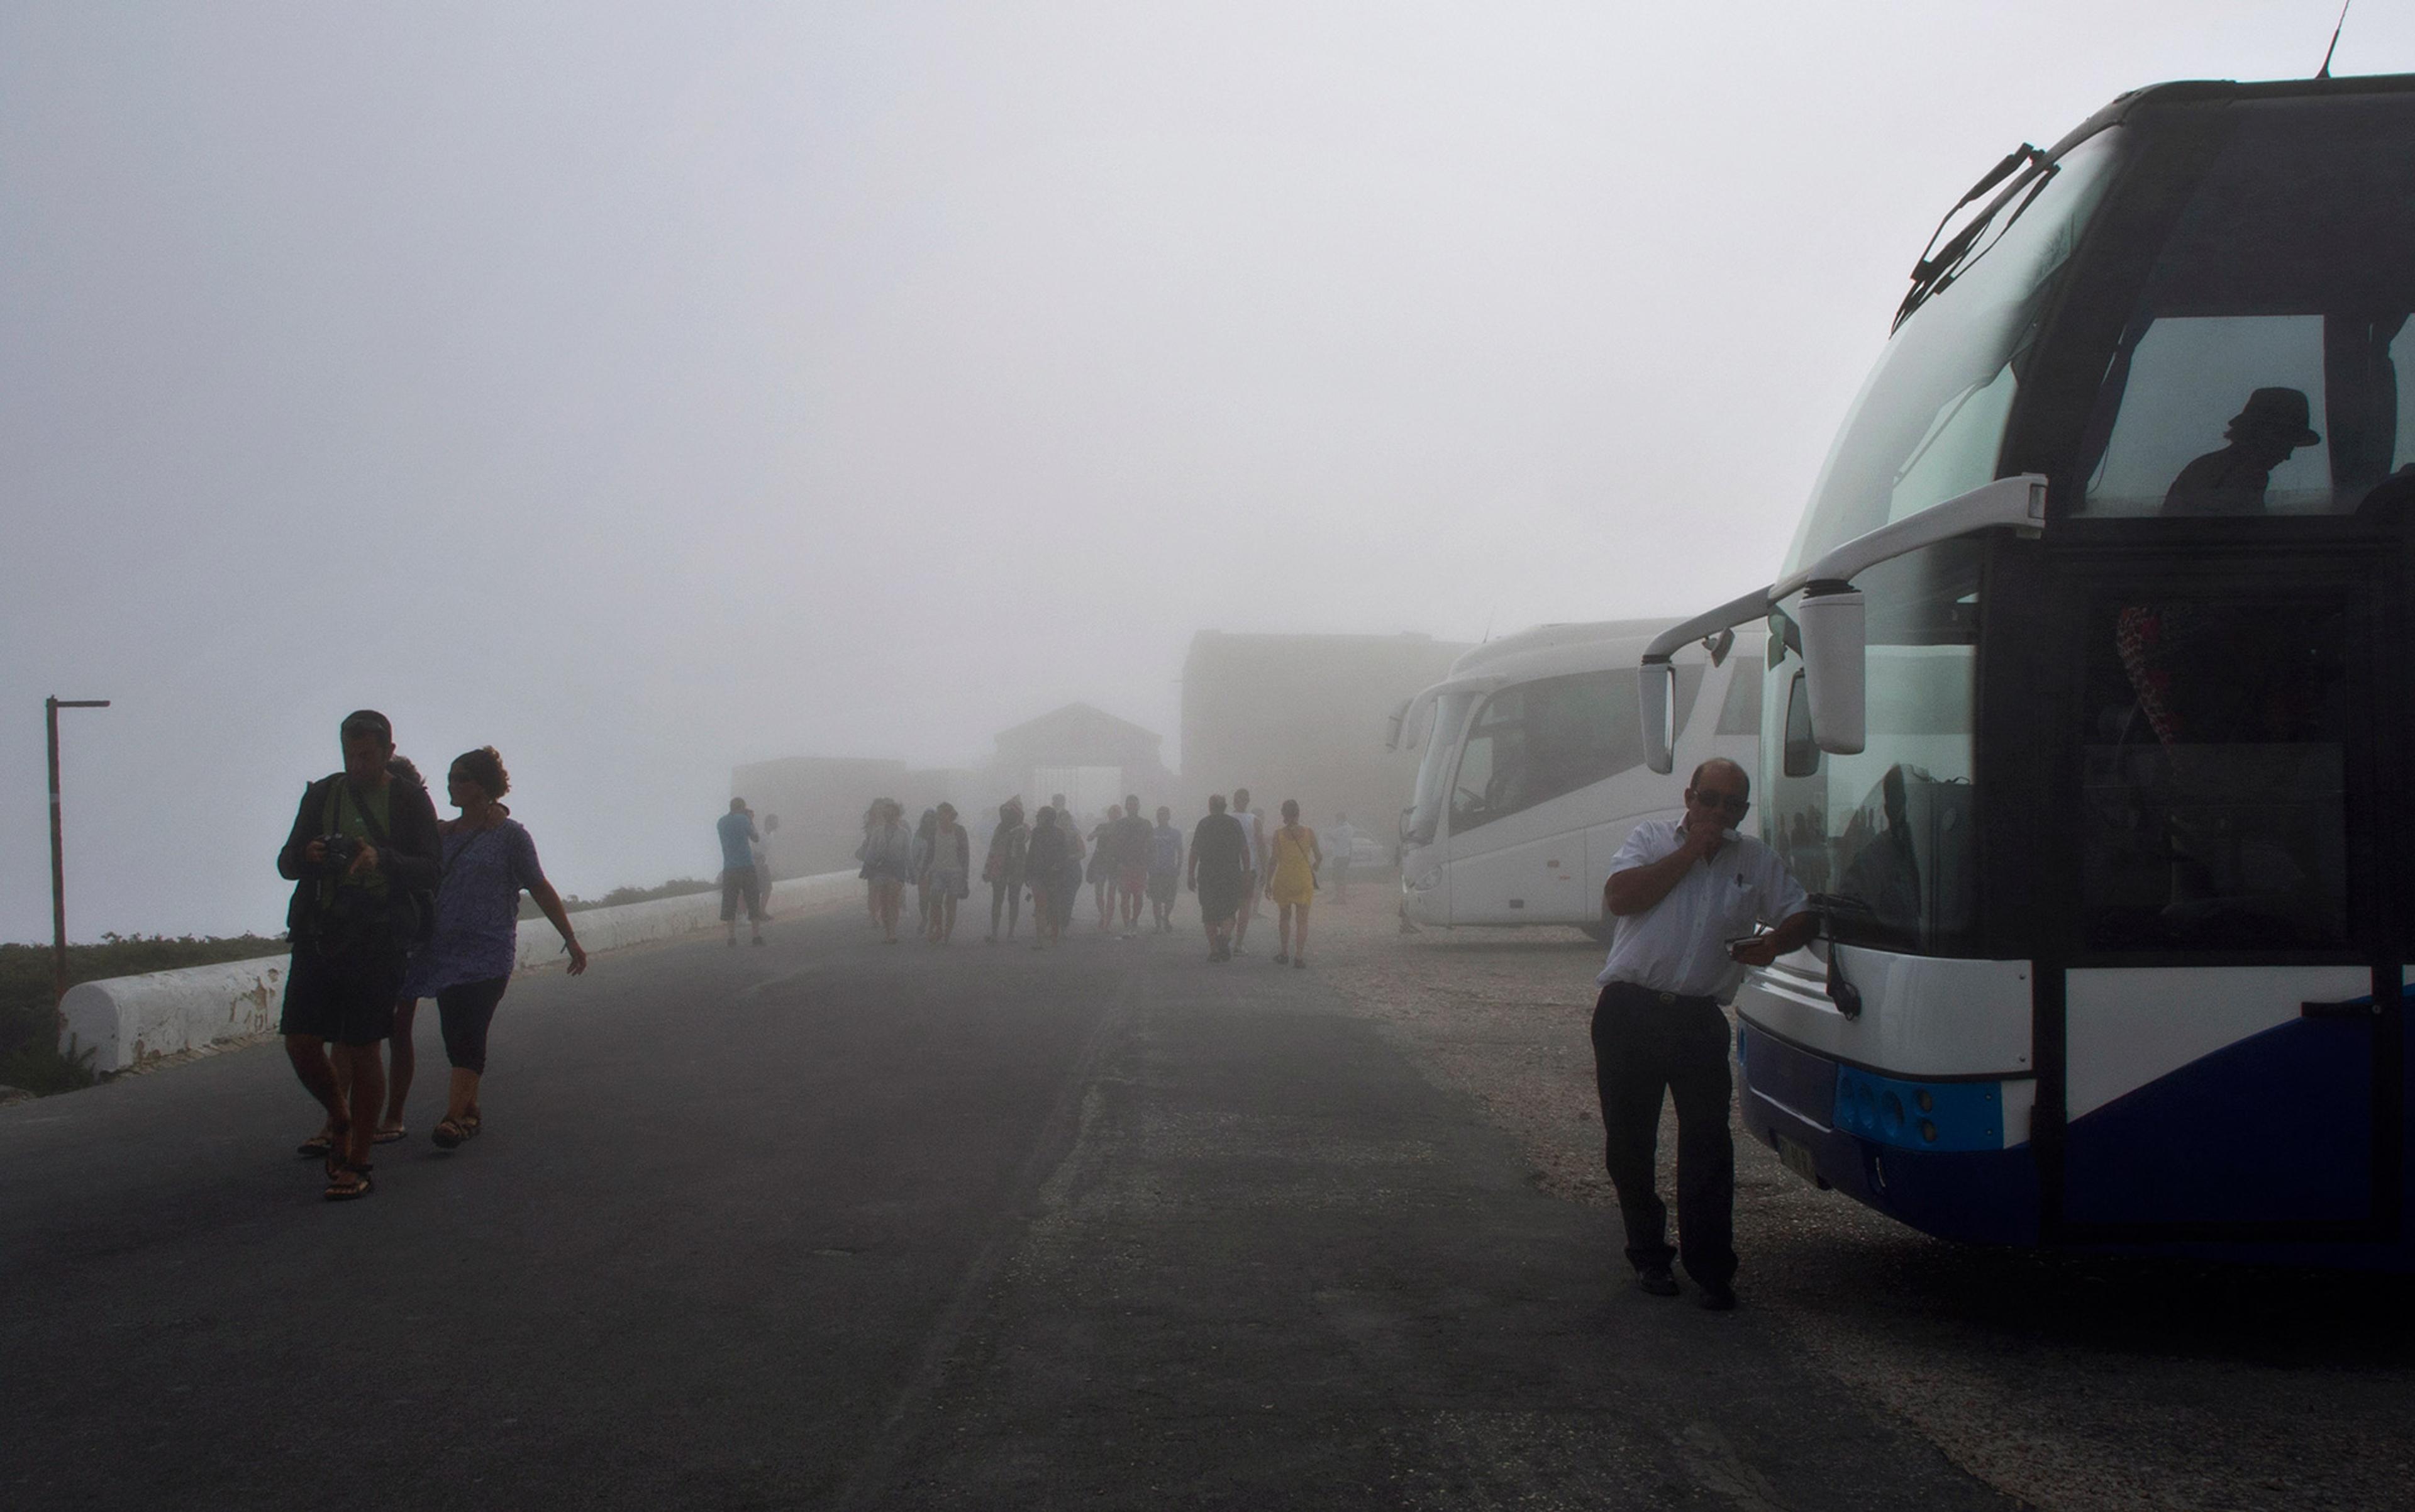 Tourists walking on a foggy road with buses parked on the side and a driver standing beside a bus, partially obstructed by the fog.